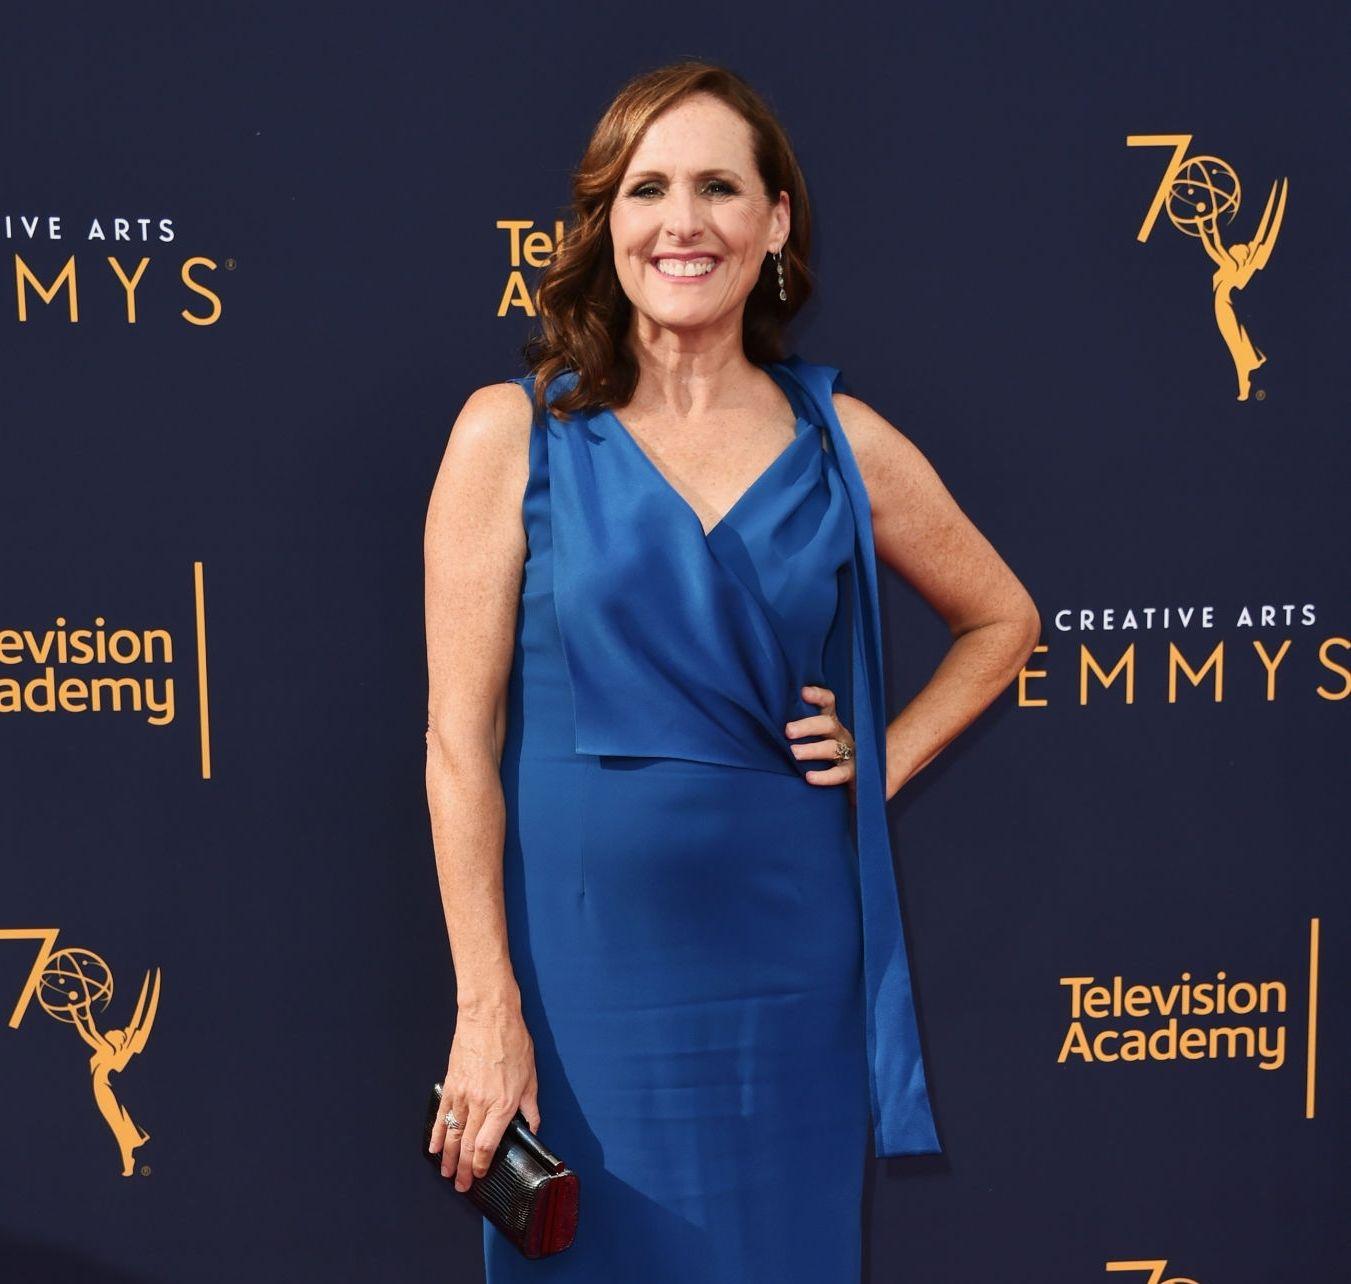 49 Hot Pictures Of Molly Shannon Show Off Her Curvy Figure To The World | Best Of Comic Books